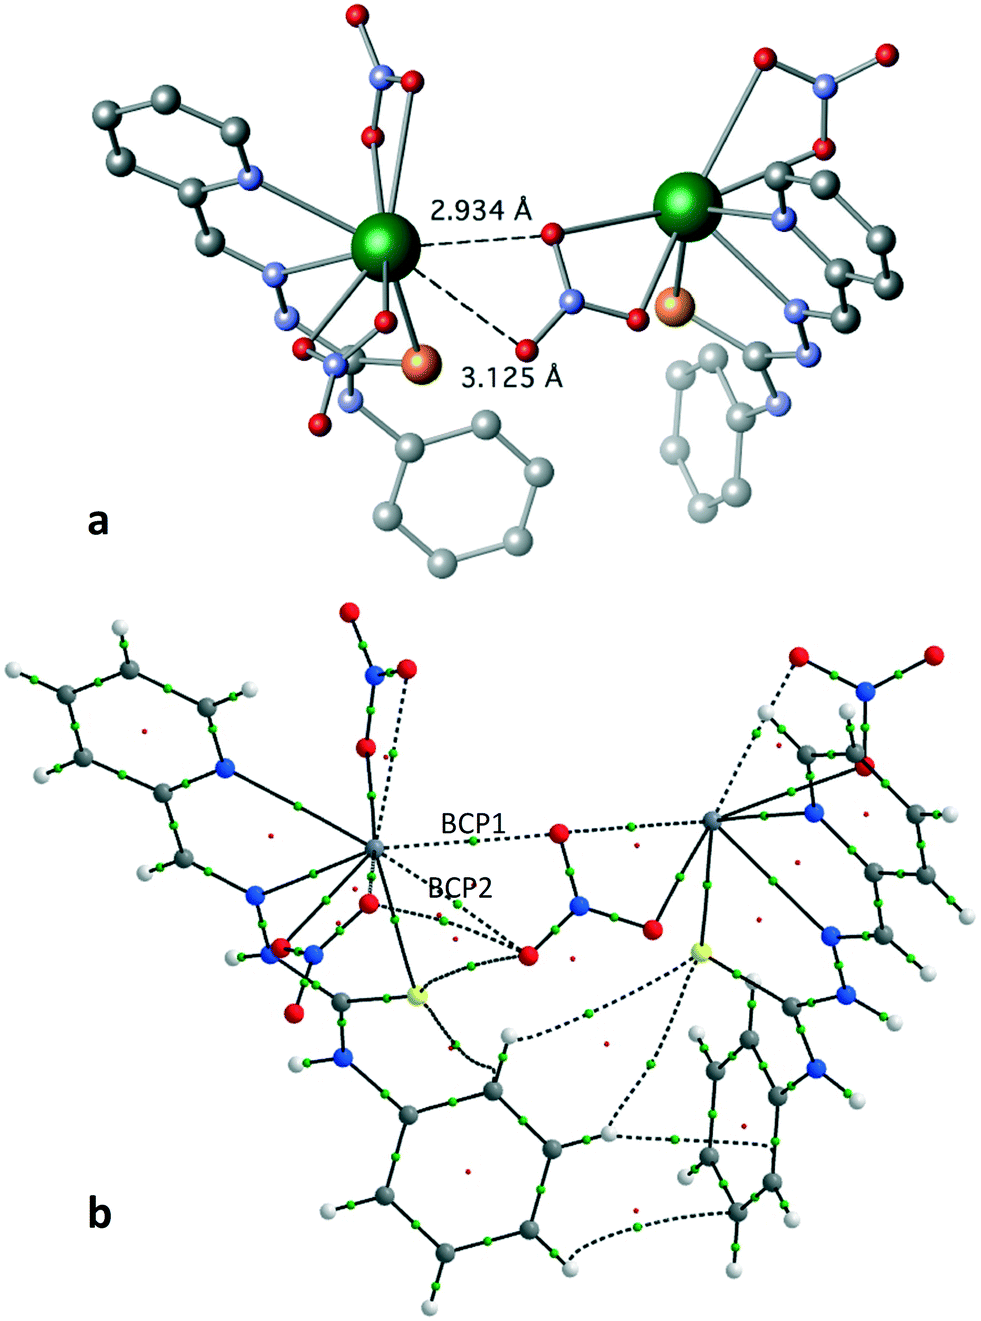 Experimental And Theoretical Study Of Pb S And Pb O S Hole Interactions In The Crystal Structures Of Pb Ii Complexes Crystengcomm Rsc Publishing